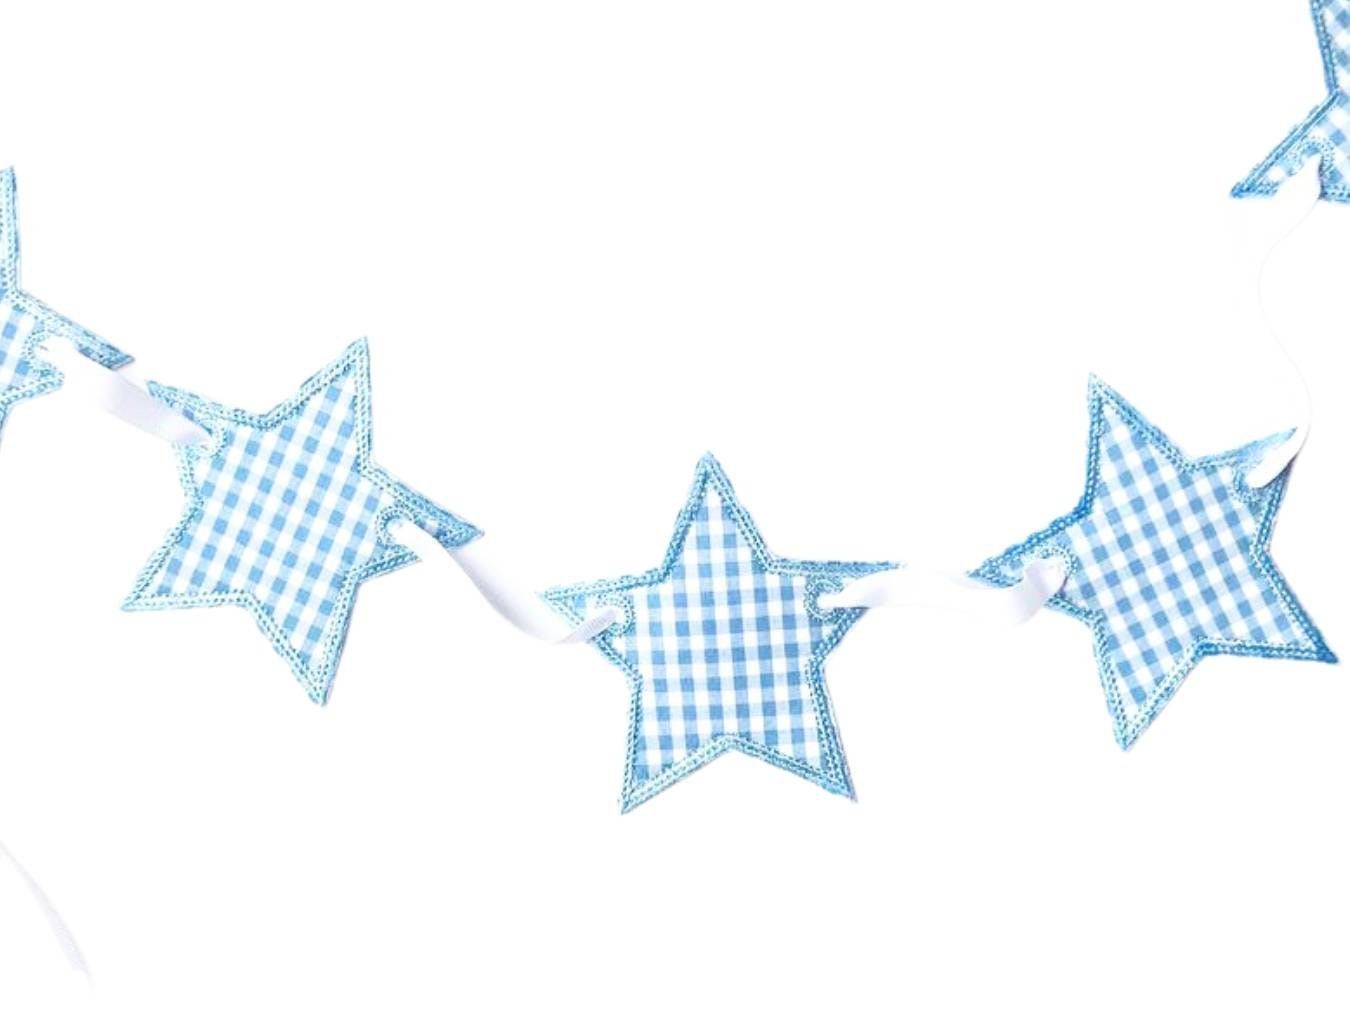 Blue Gingham Star Bunting I Birthday Party Decor I Star Garland I Nursery Decor I Kids Room Wall Decor I Red White Blue |  4th of July Party